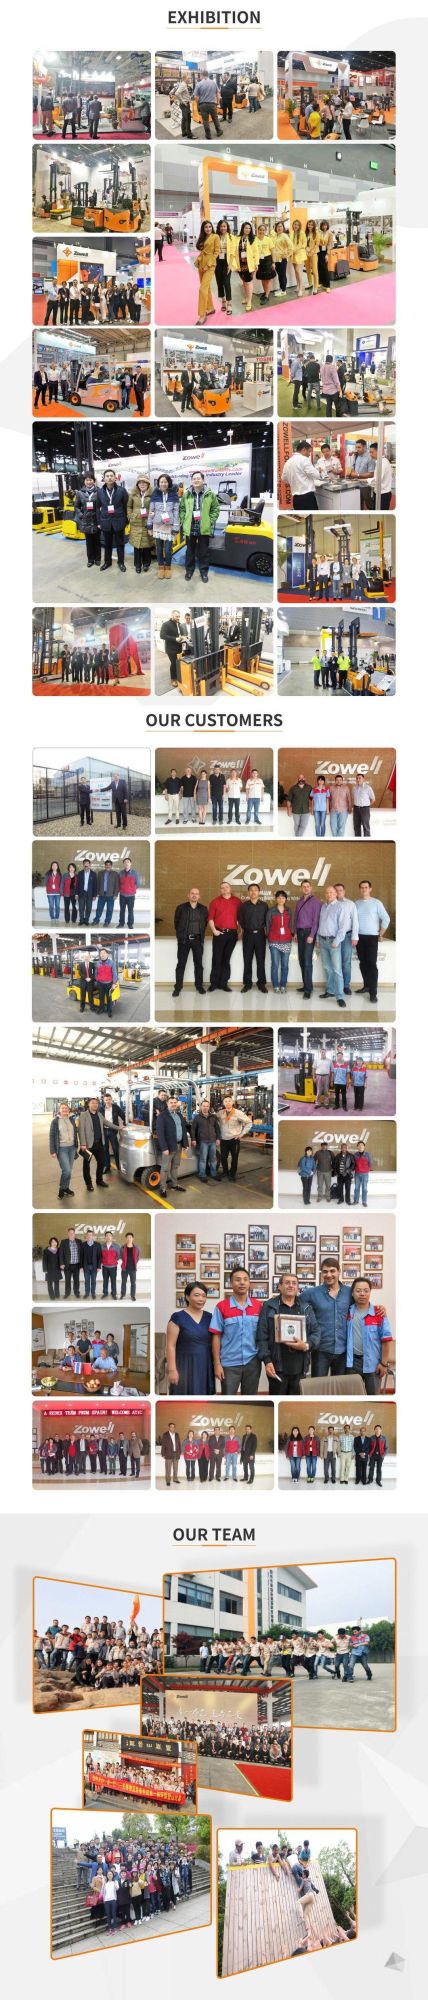 Electric 500mm Zowell Wooden Suzhou, China Pallet Truck Price Battery